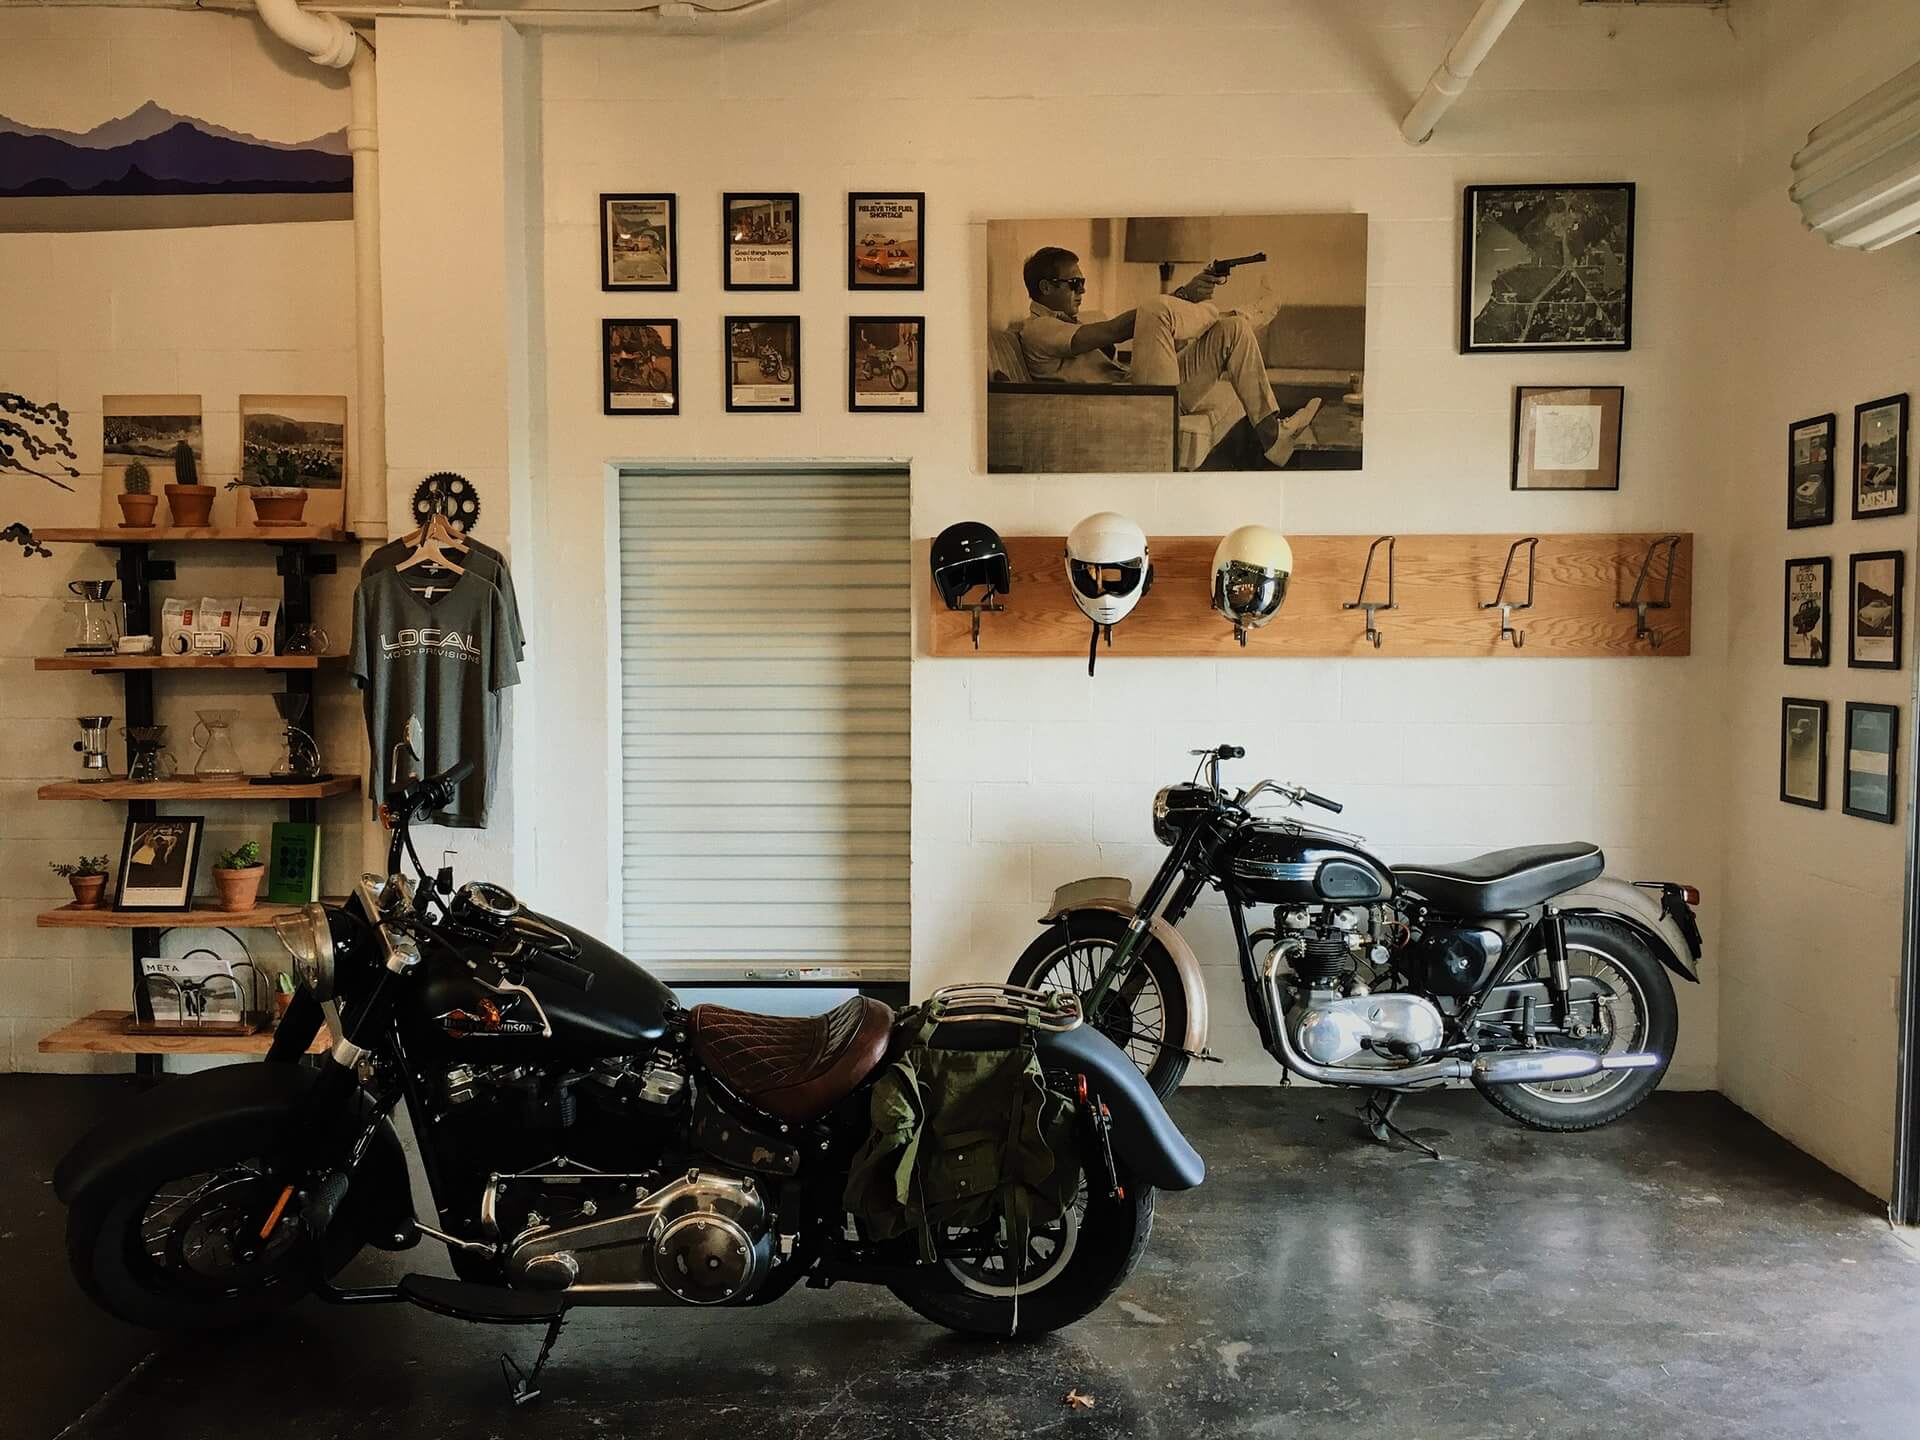 Two motorcycles in a room with shelves and framed pictures